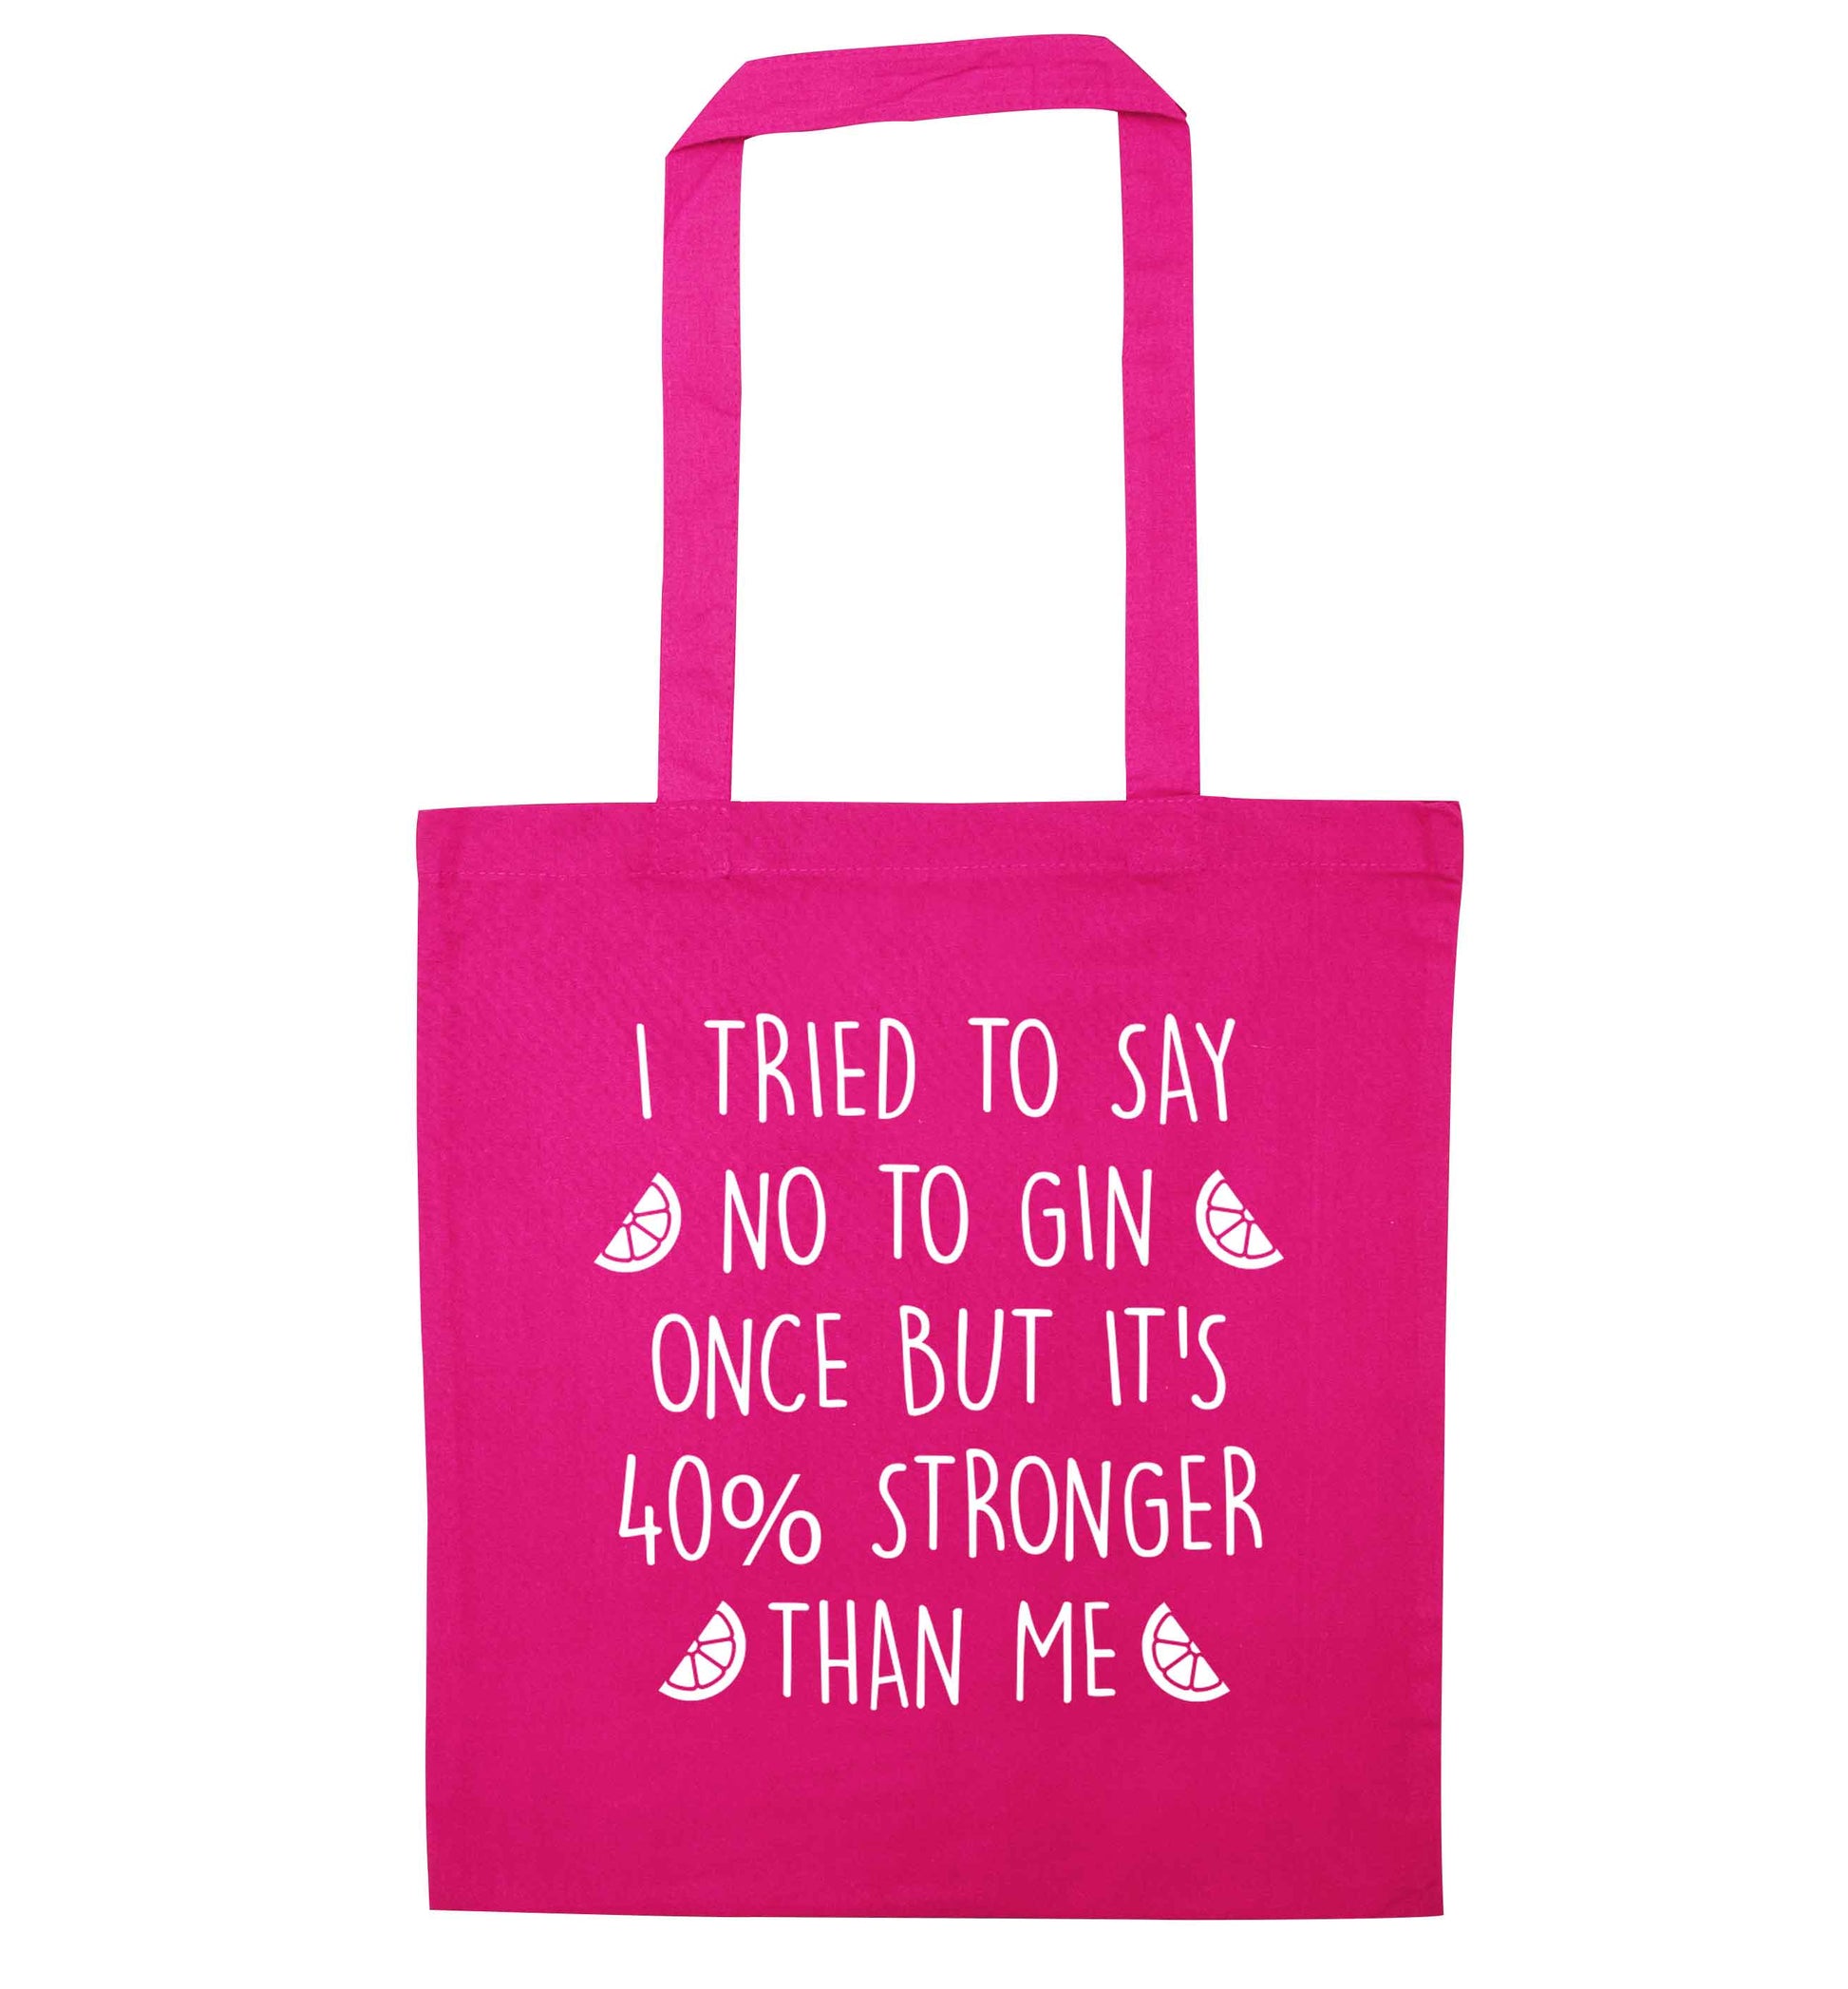 I tried to say no to gin once but it's 40% stronger than me pink tote bag